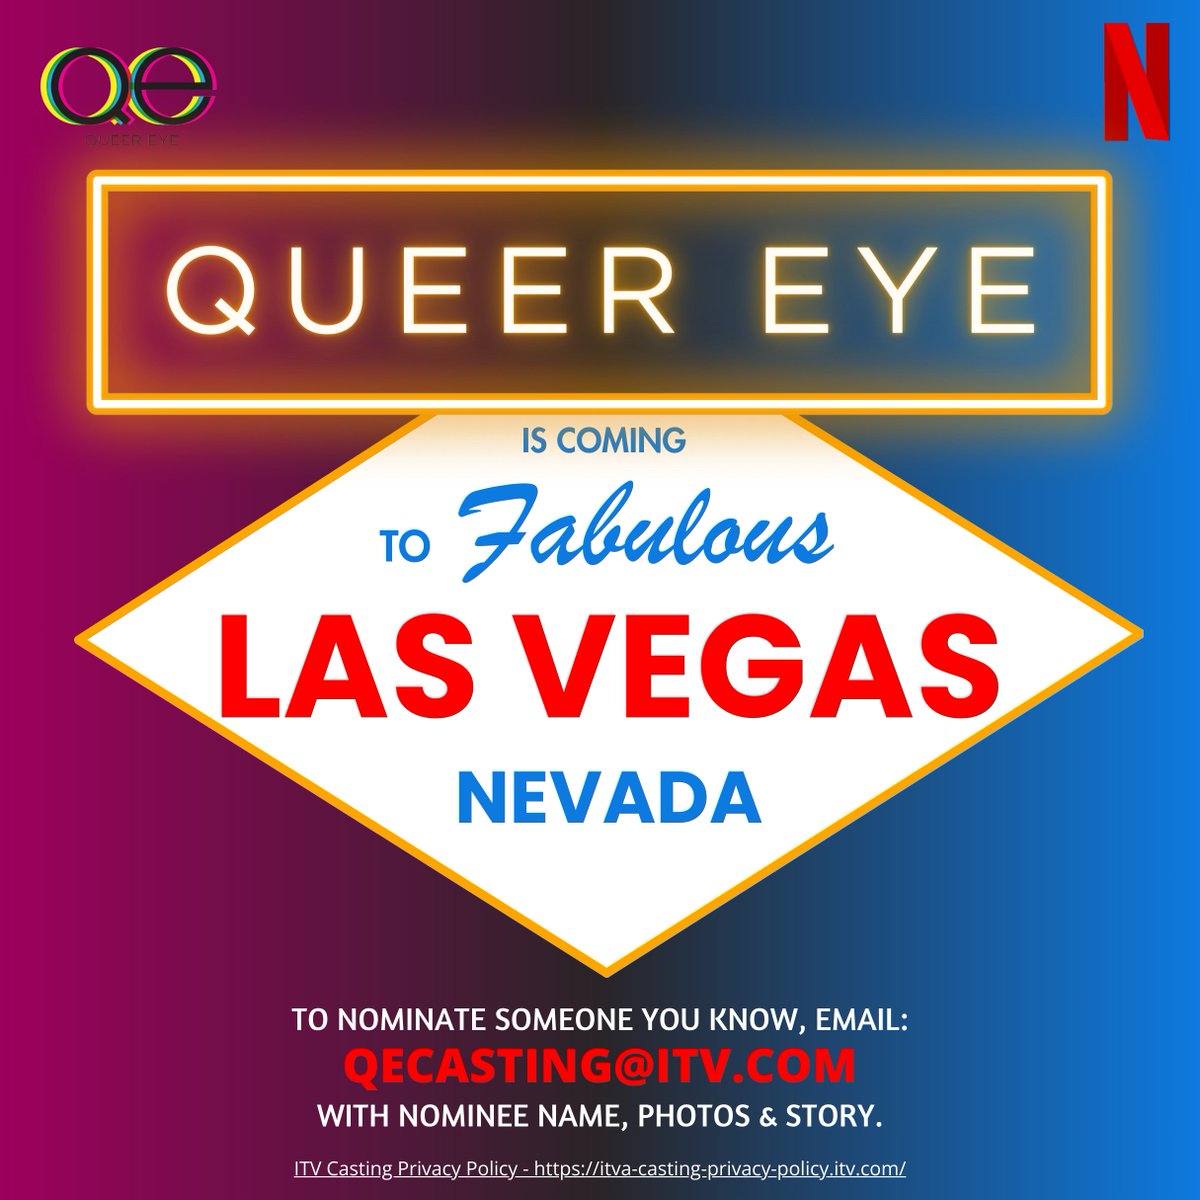 ✨ Vegas casino dealers, your moment is here! 🌟 #QueerEye is casting in Las Vegas & you could be the next hero! Ready for a life-changing makeover? 🤩 Email the show or for a personal intro, email me at heather@vegas-aces.com with your details & a pic #CastingCall #LasVegas